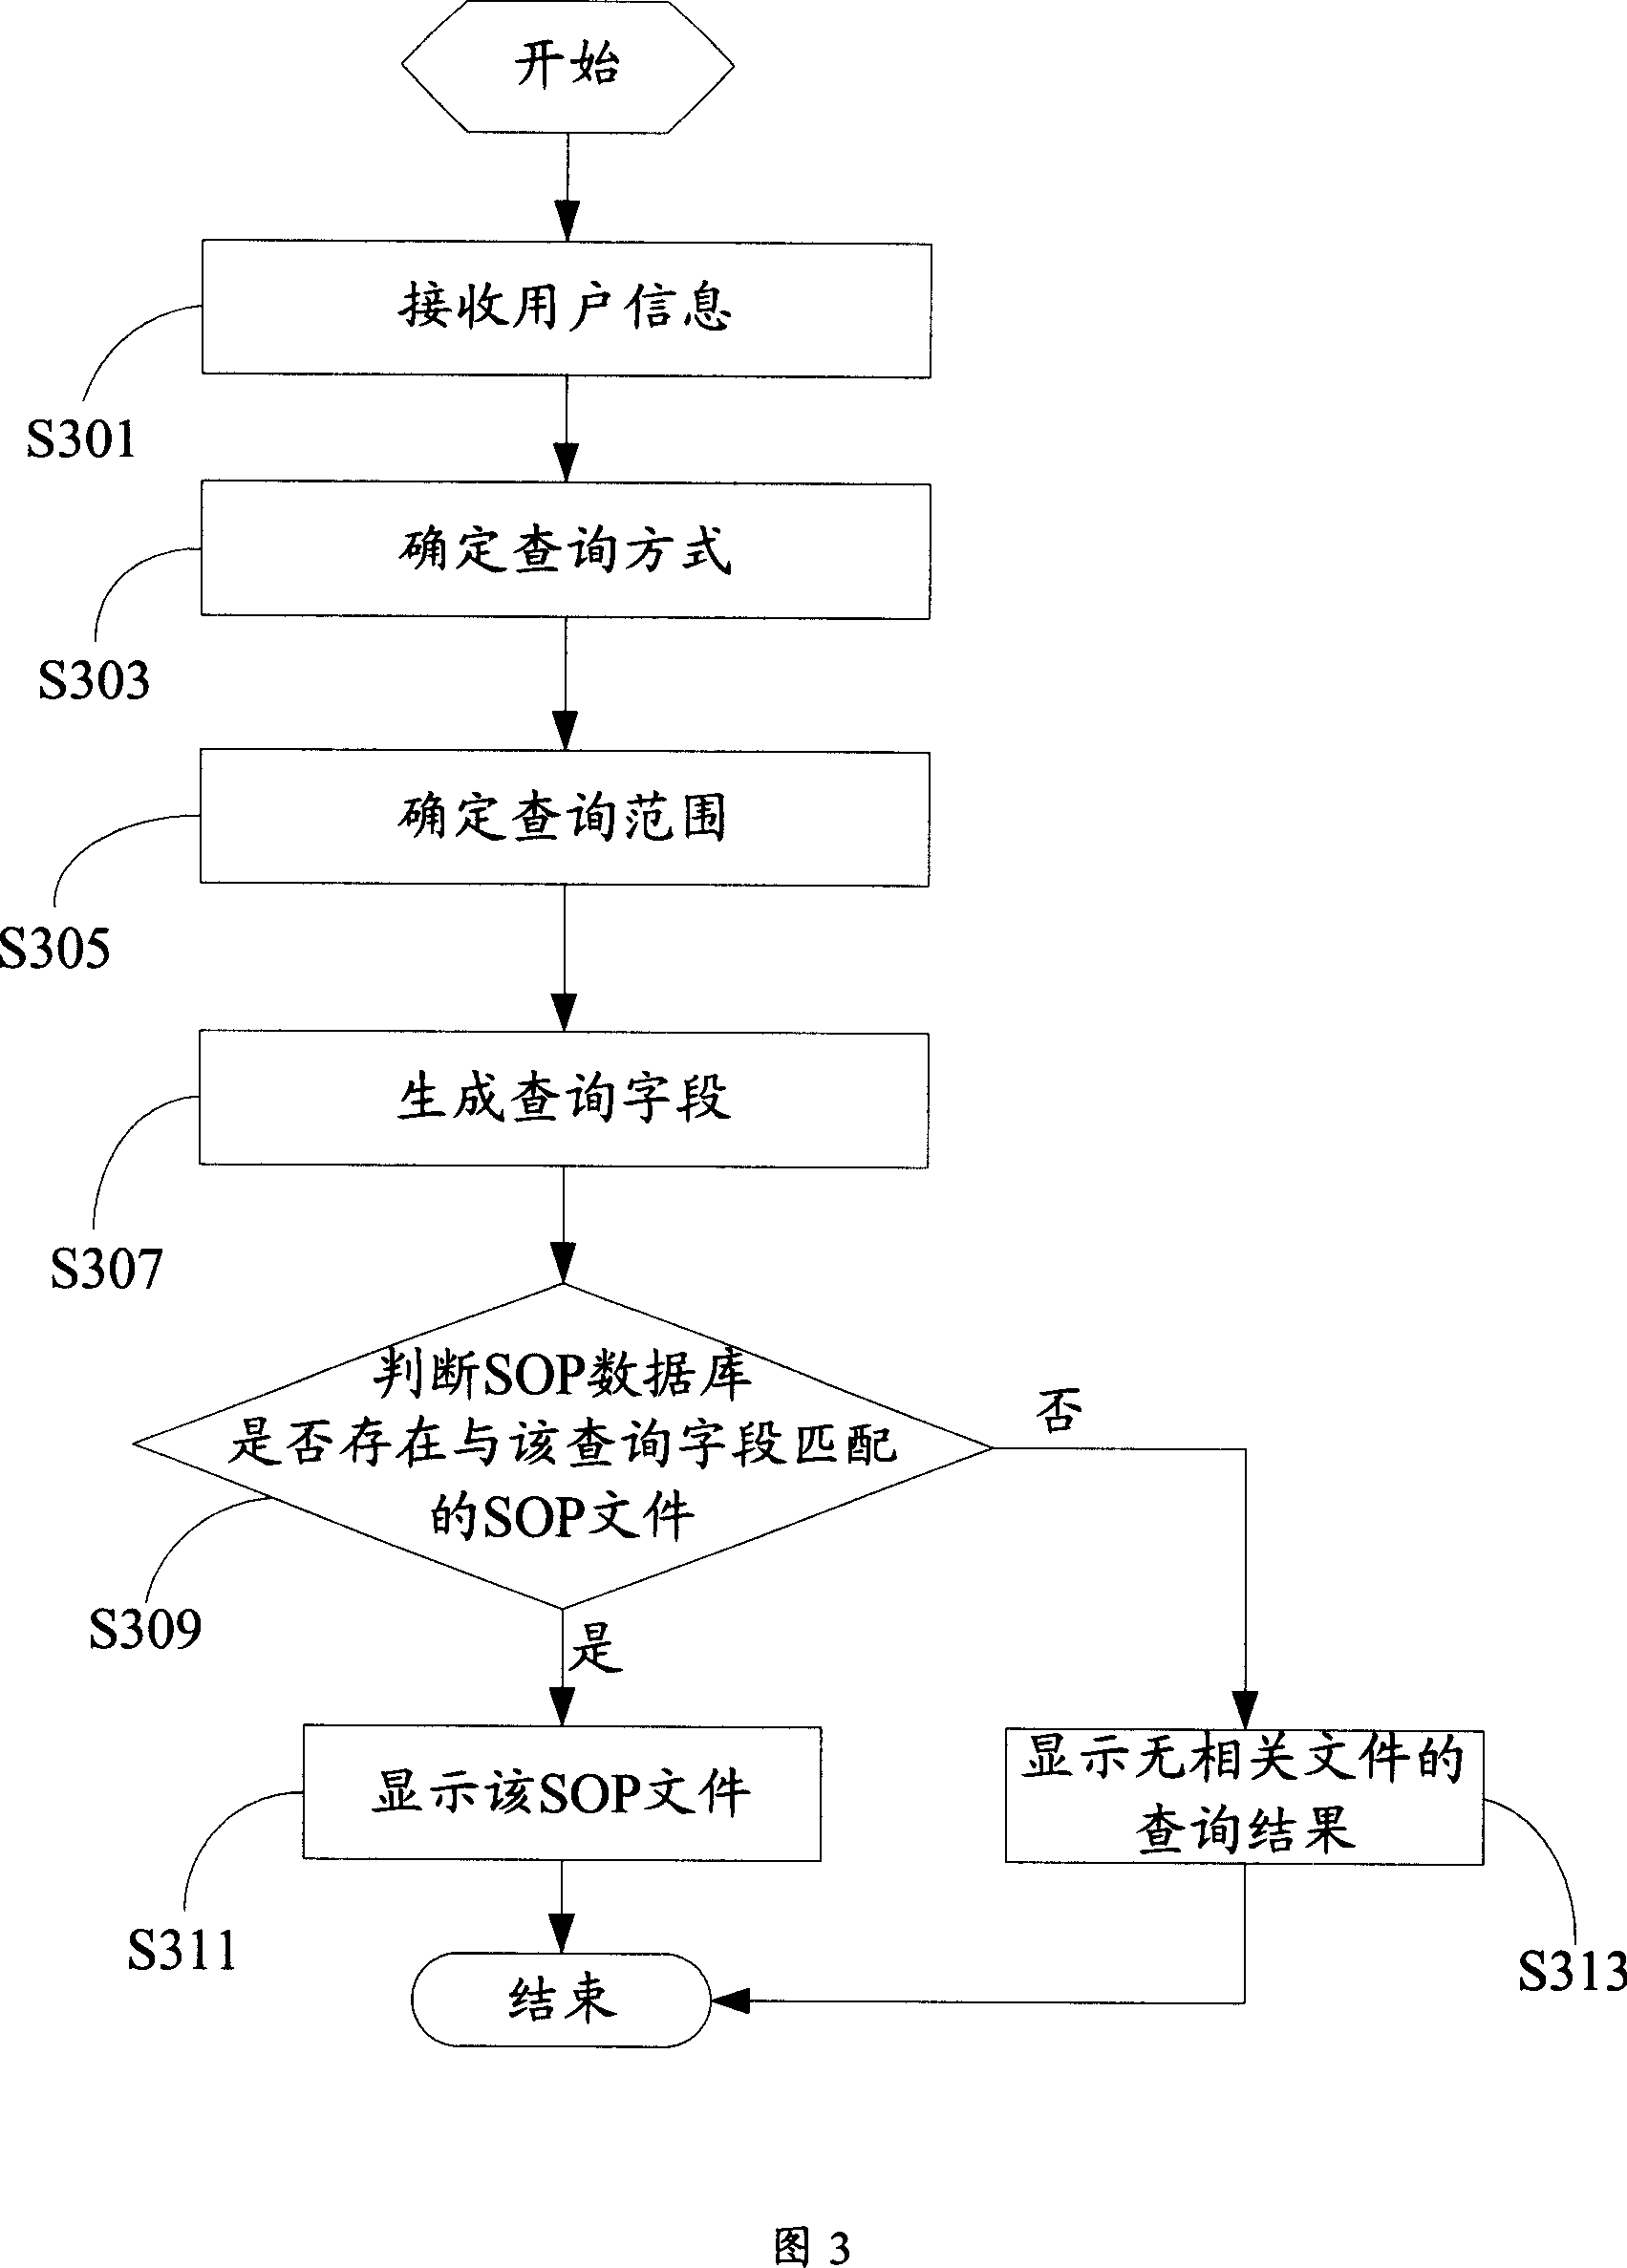 System and method for querying files of standard operating procedure